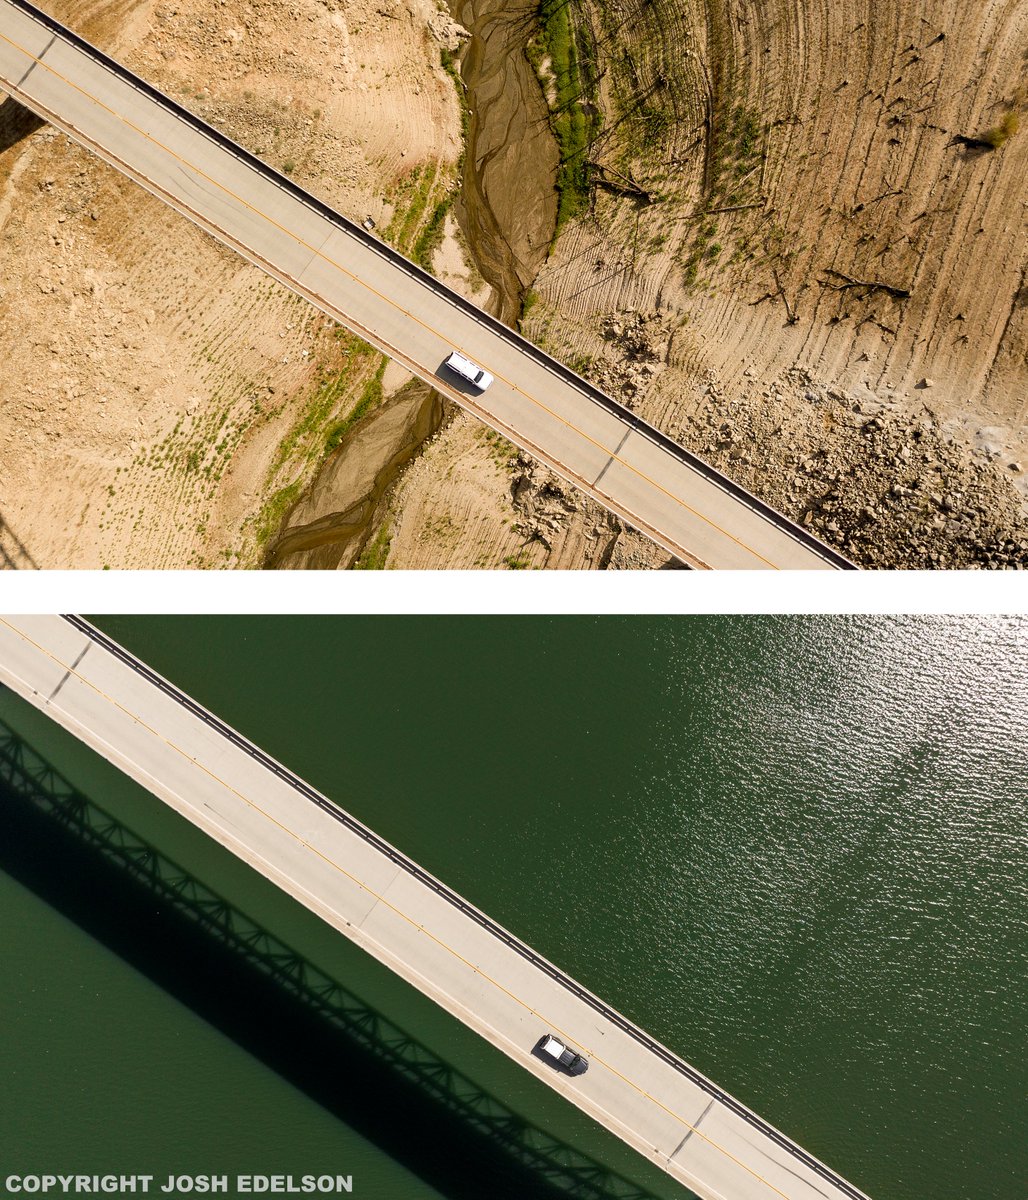 #DROUGHT (Before/After): in 2021, #LakeOroville was nearly empty. Now it's so full, water is being released to make room for an expected deluge of snowmelt. These composites of before (9/5/21) and after (4/16/23) photos of Lake Oroville show how dramatically it has changed.